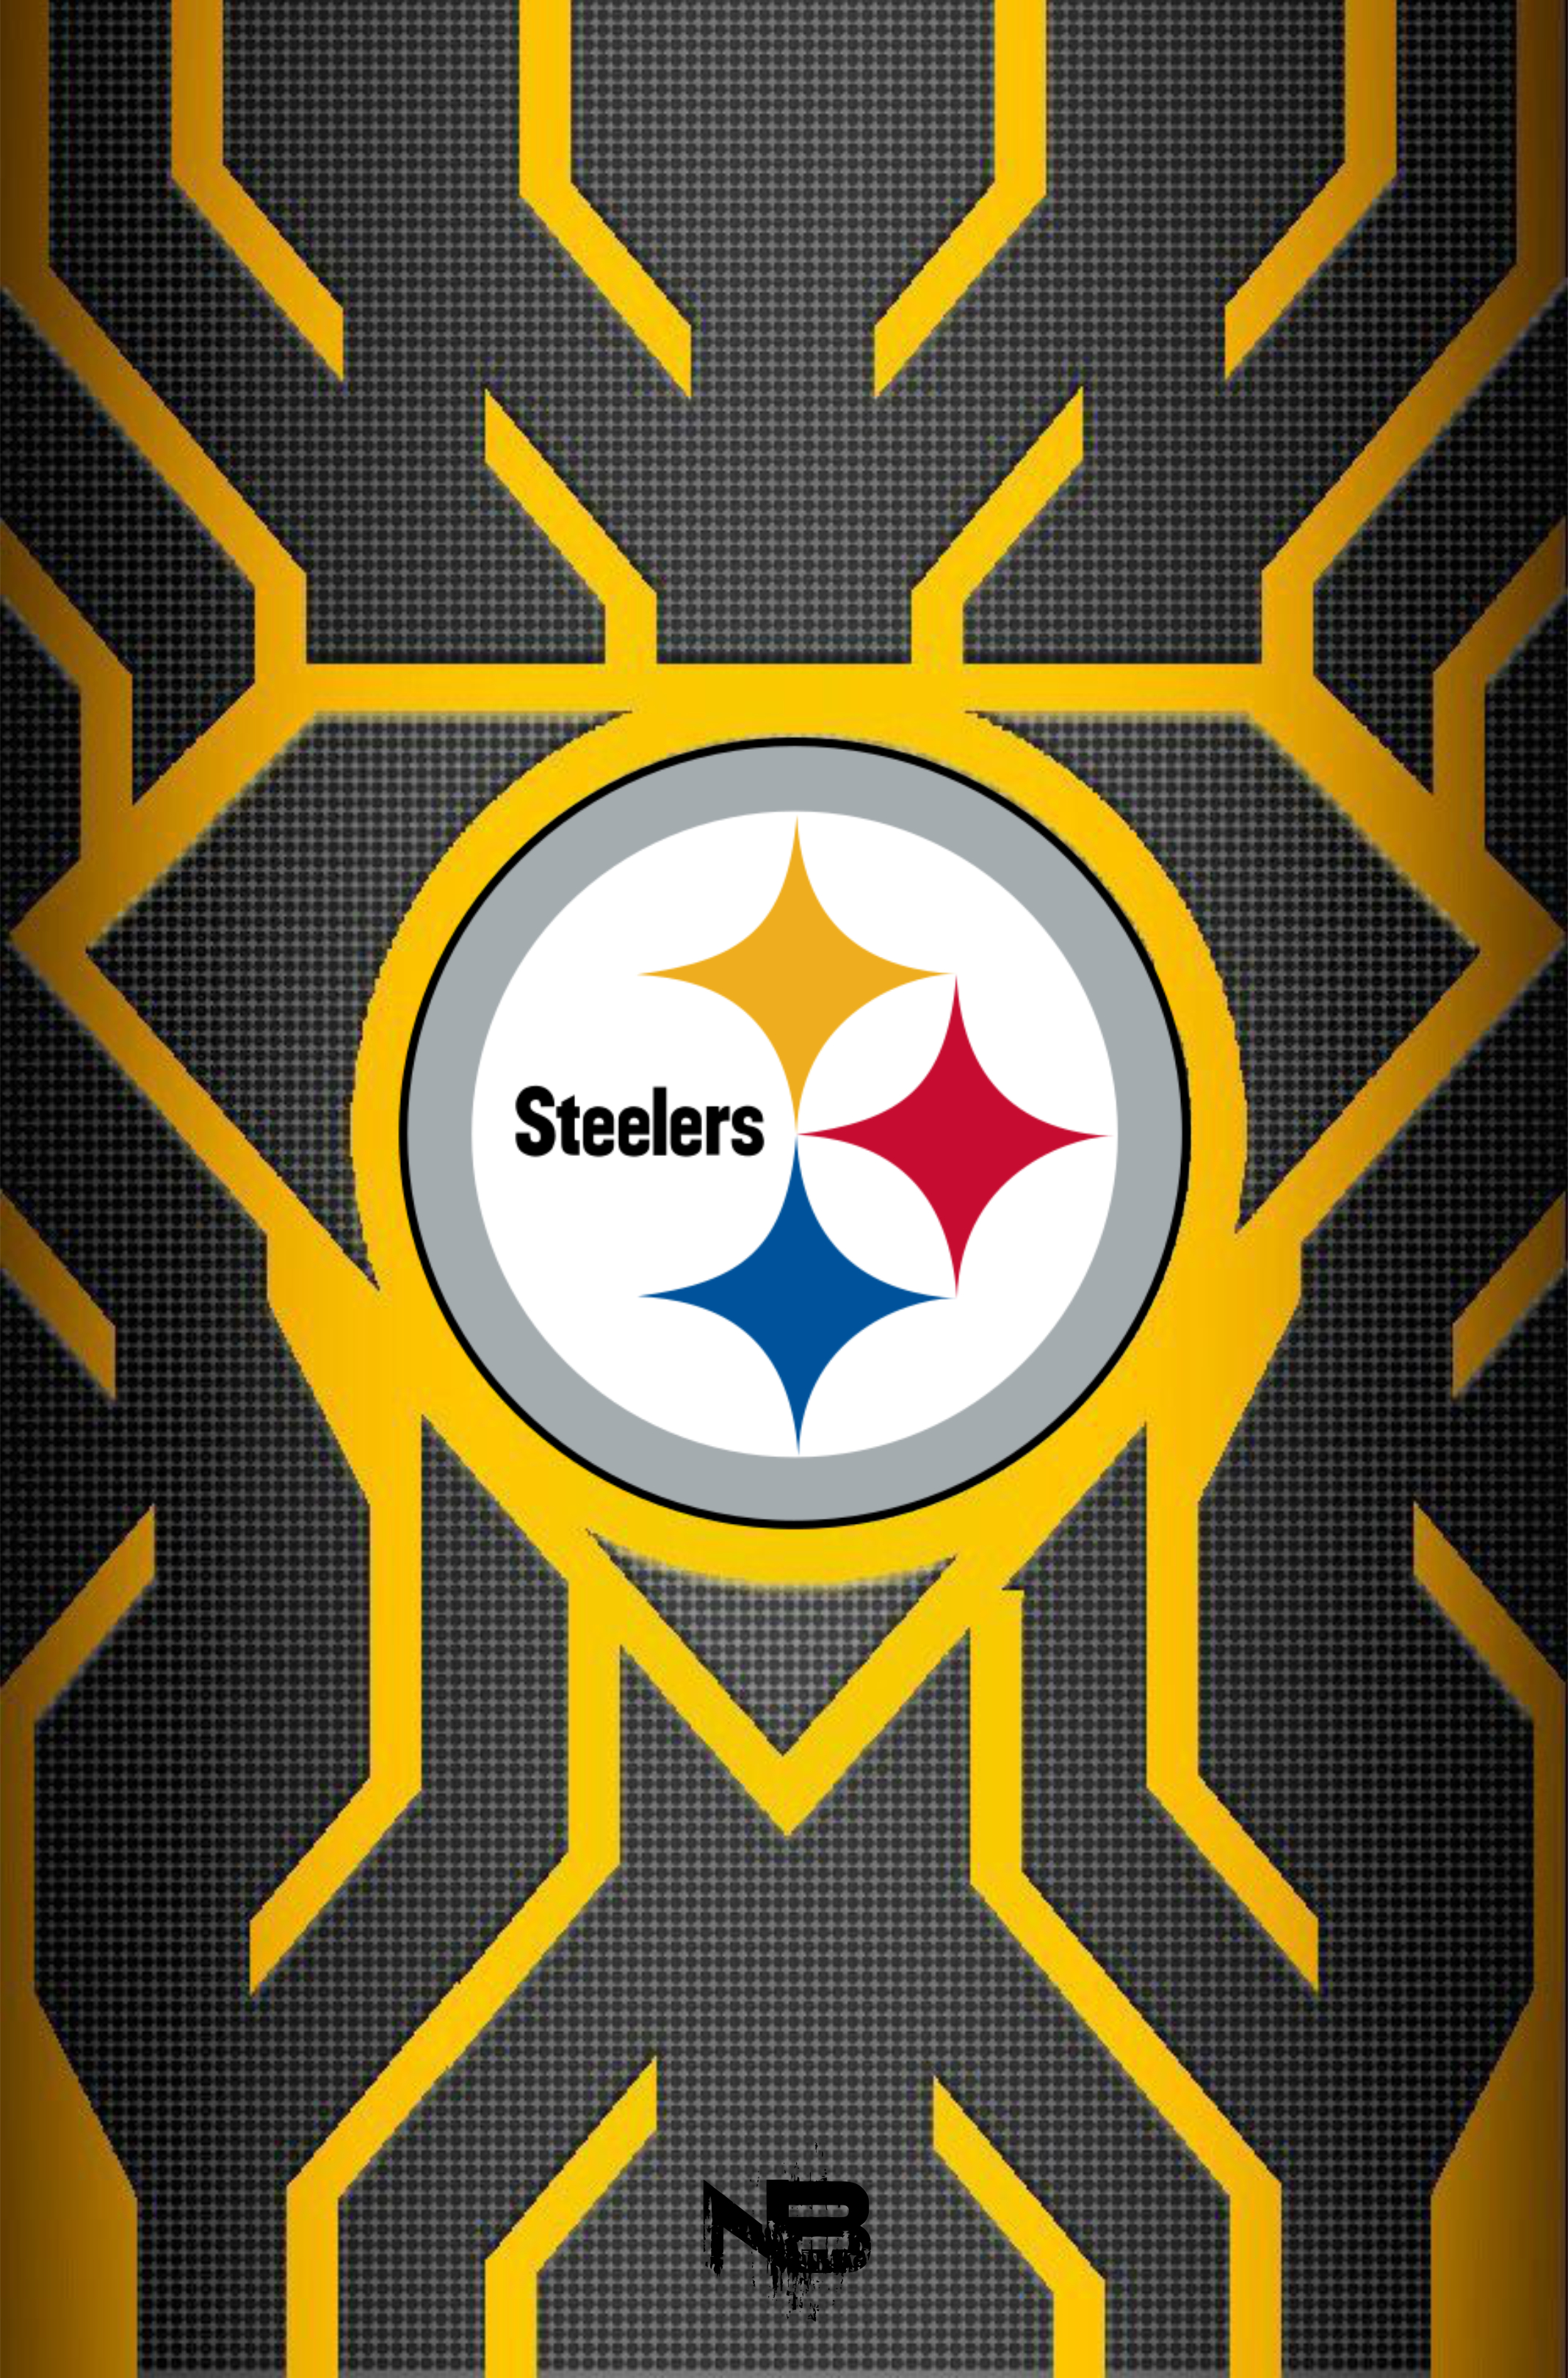 2135x3238 Pin by Randy on Steelers | Pittsburgh steelers wallpaper, Pittsburgh steelers logo, Pitsburgh steelers